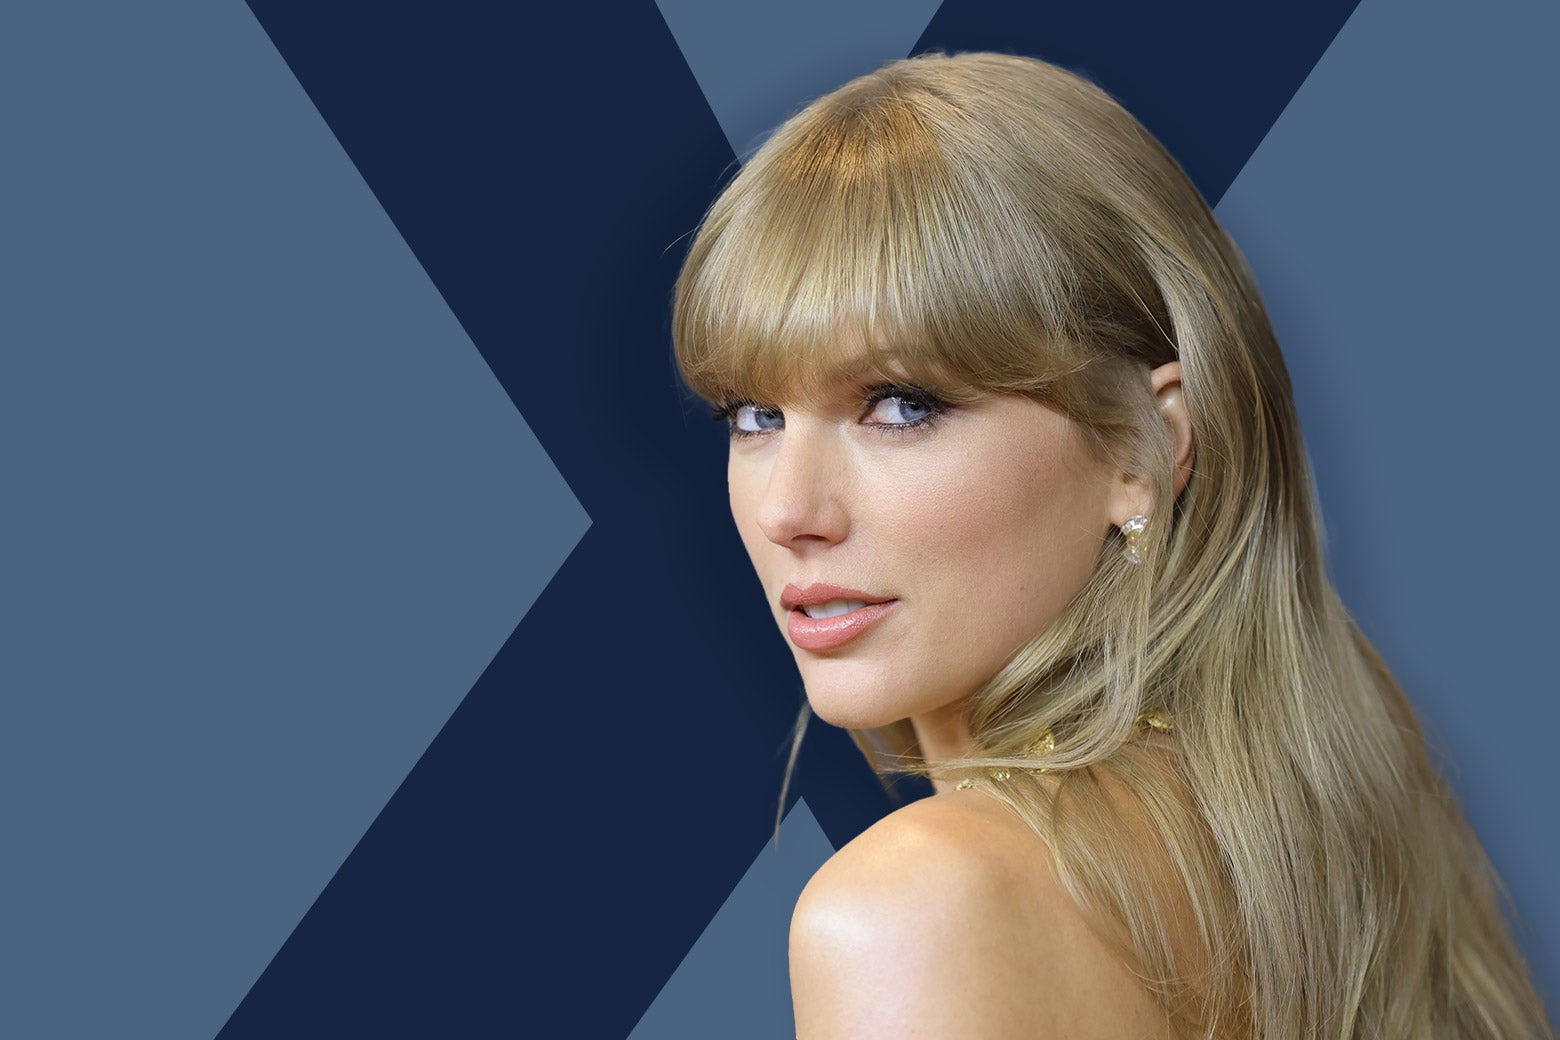 Taylor Swift looking back, set against a blue background with an "X" on it.